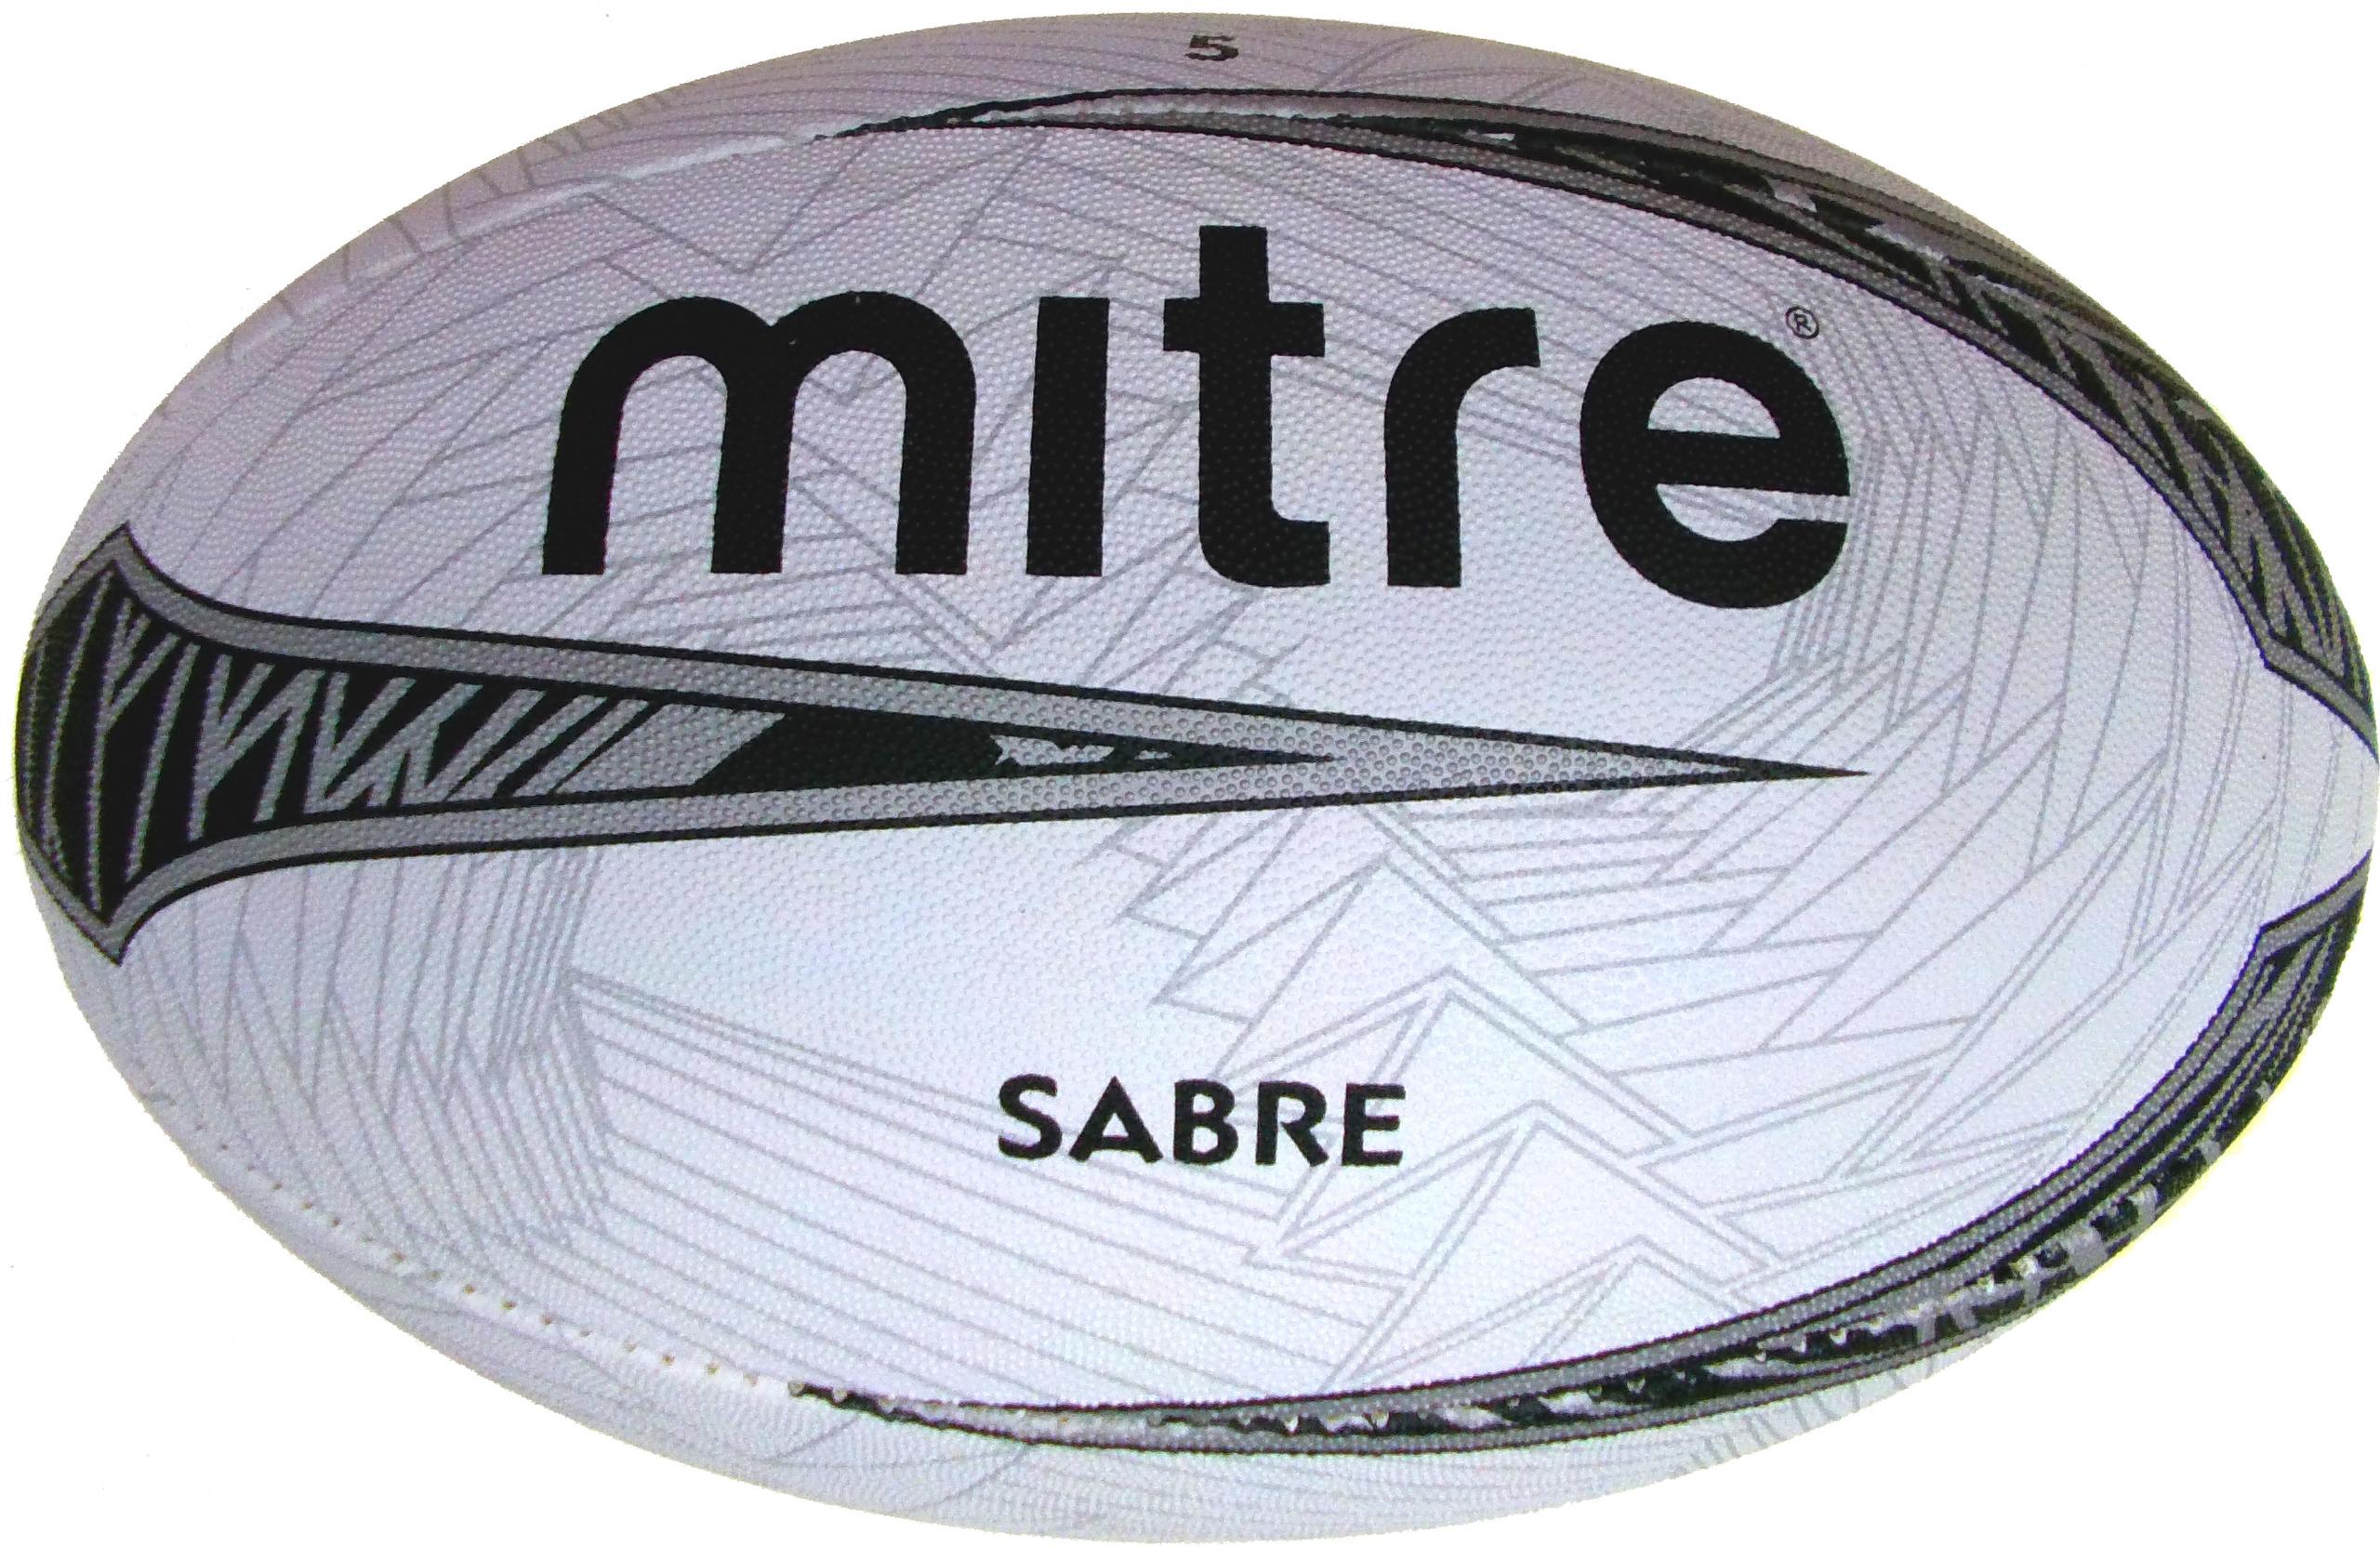 Mitre Sabre Rugby Ball size 5 Extra Strong Lining, white/grey/black